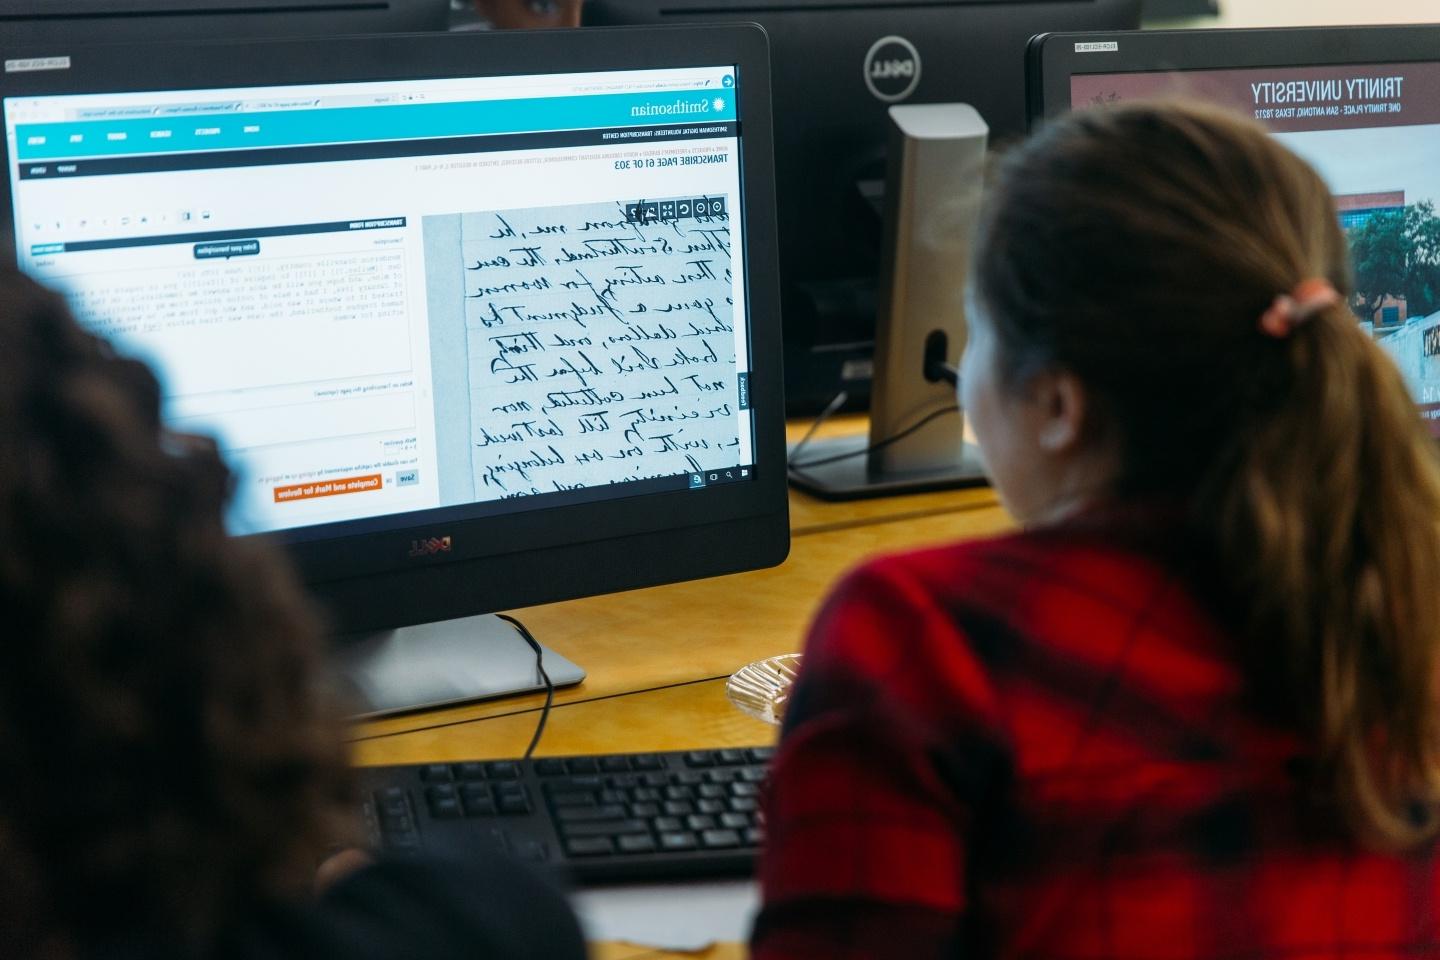 Student looking at computer screen comparing digital version of ancient manuscript and translation next to it